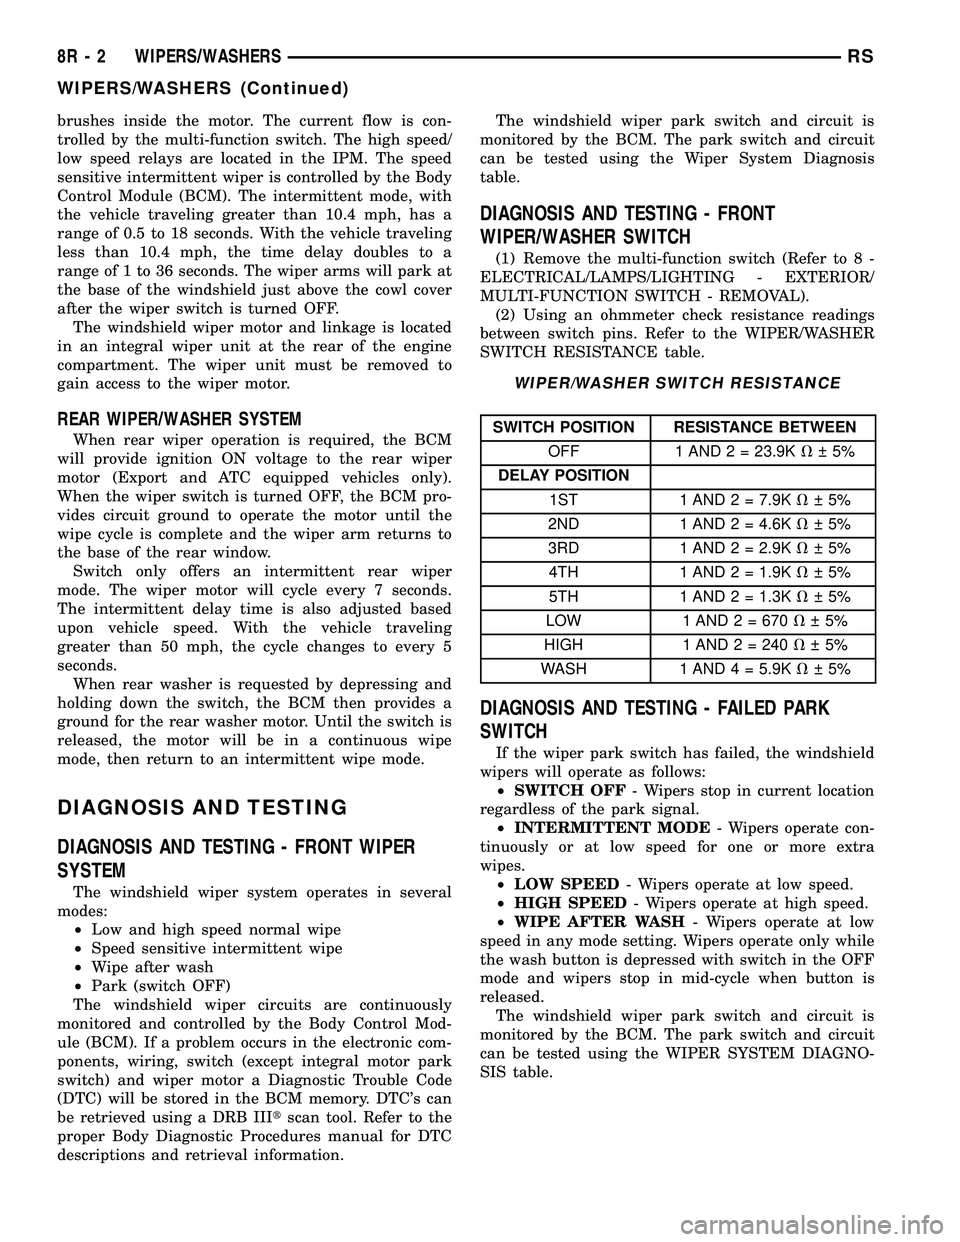 DODGE TOWN AND COUNTRY 2004  Service Manual brushes inside the motor. The current flow is con-
trolled by the multi-function switch. The high speed/
low speed relays are located in the IPM. The speed
sensitive intermittent wiper is controlled b